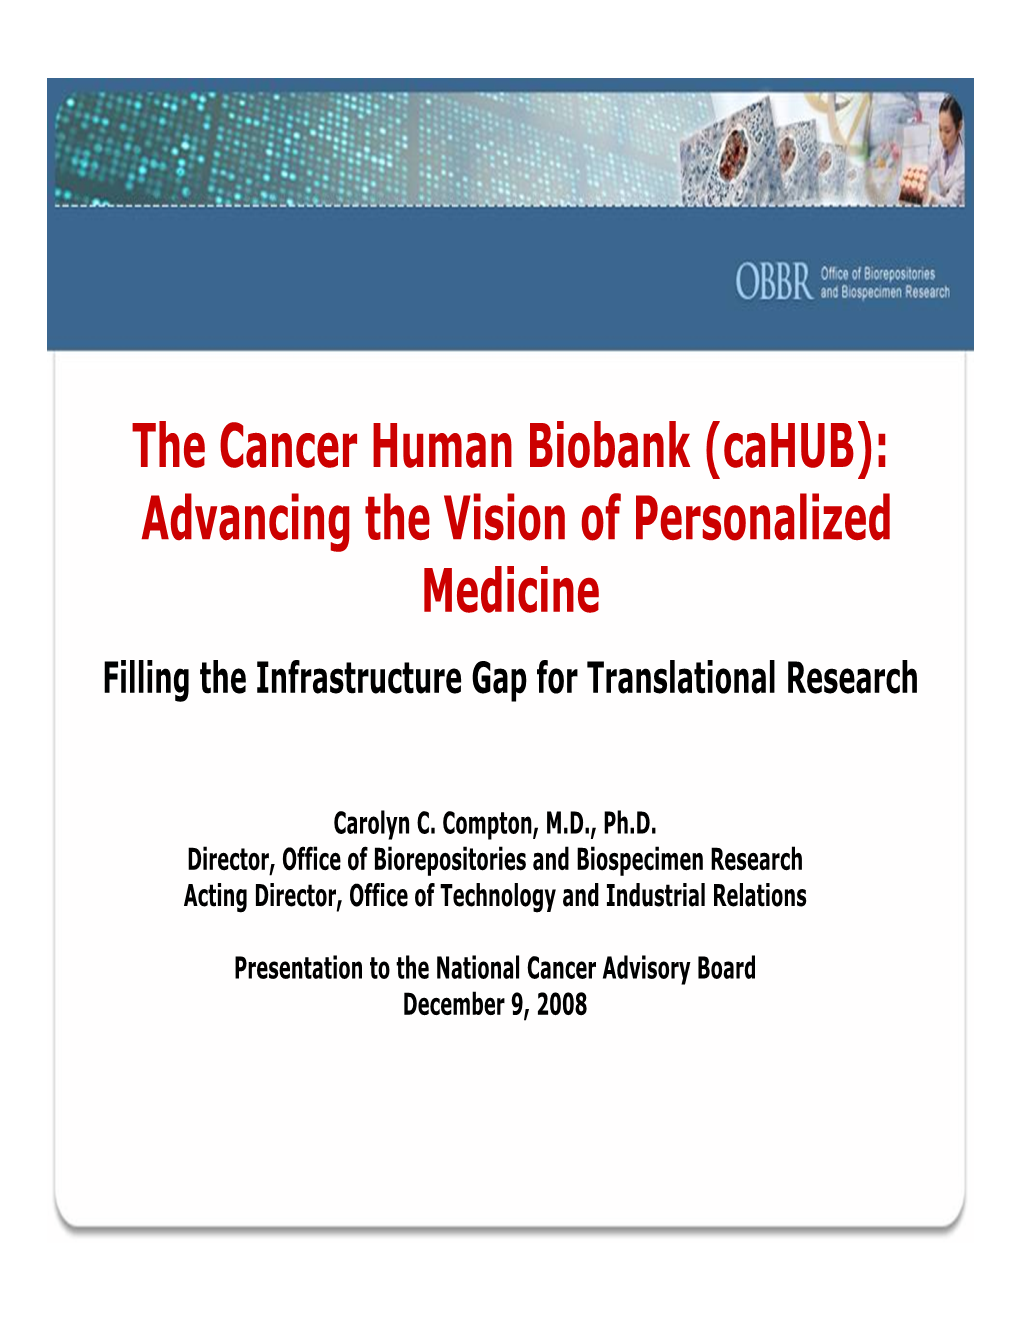 The Cancer Human Biobank (Cahub): Advancing the Vision of Personalized Medicine Filling the Infrastructure Gap for Translational Research